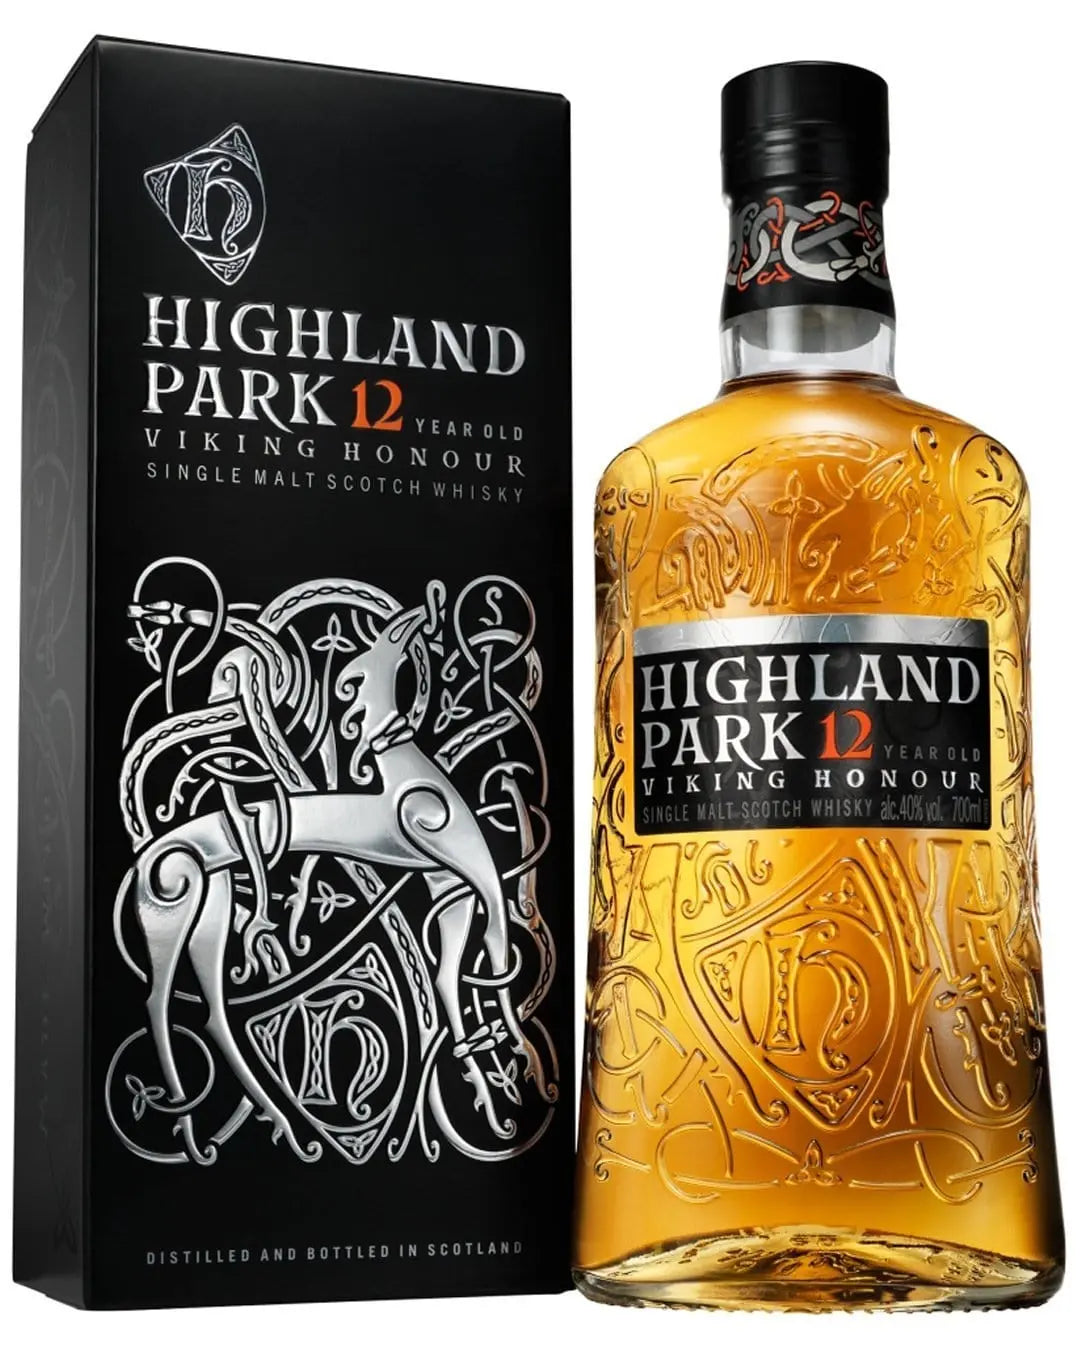 Highland Park - 12 Year Old Viking Honor Whisky, 70 cl Whisky 5010314570101